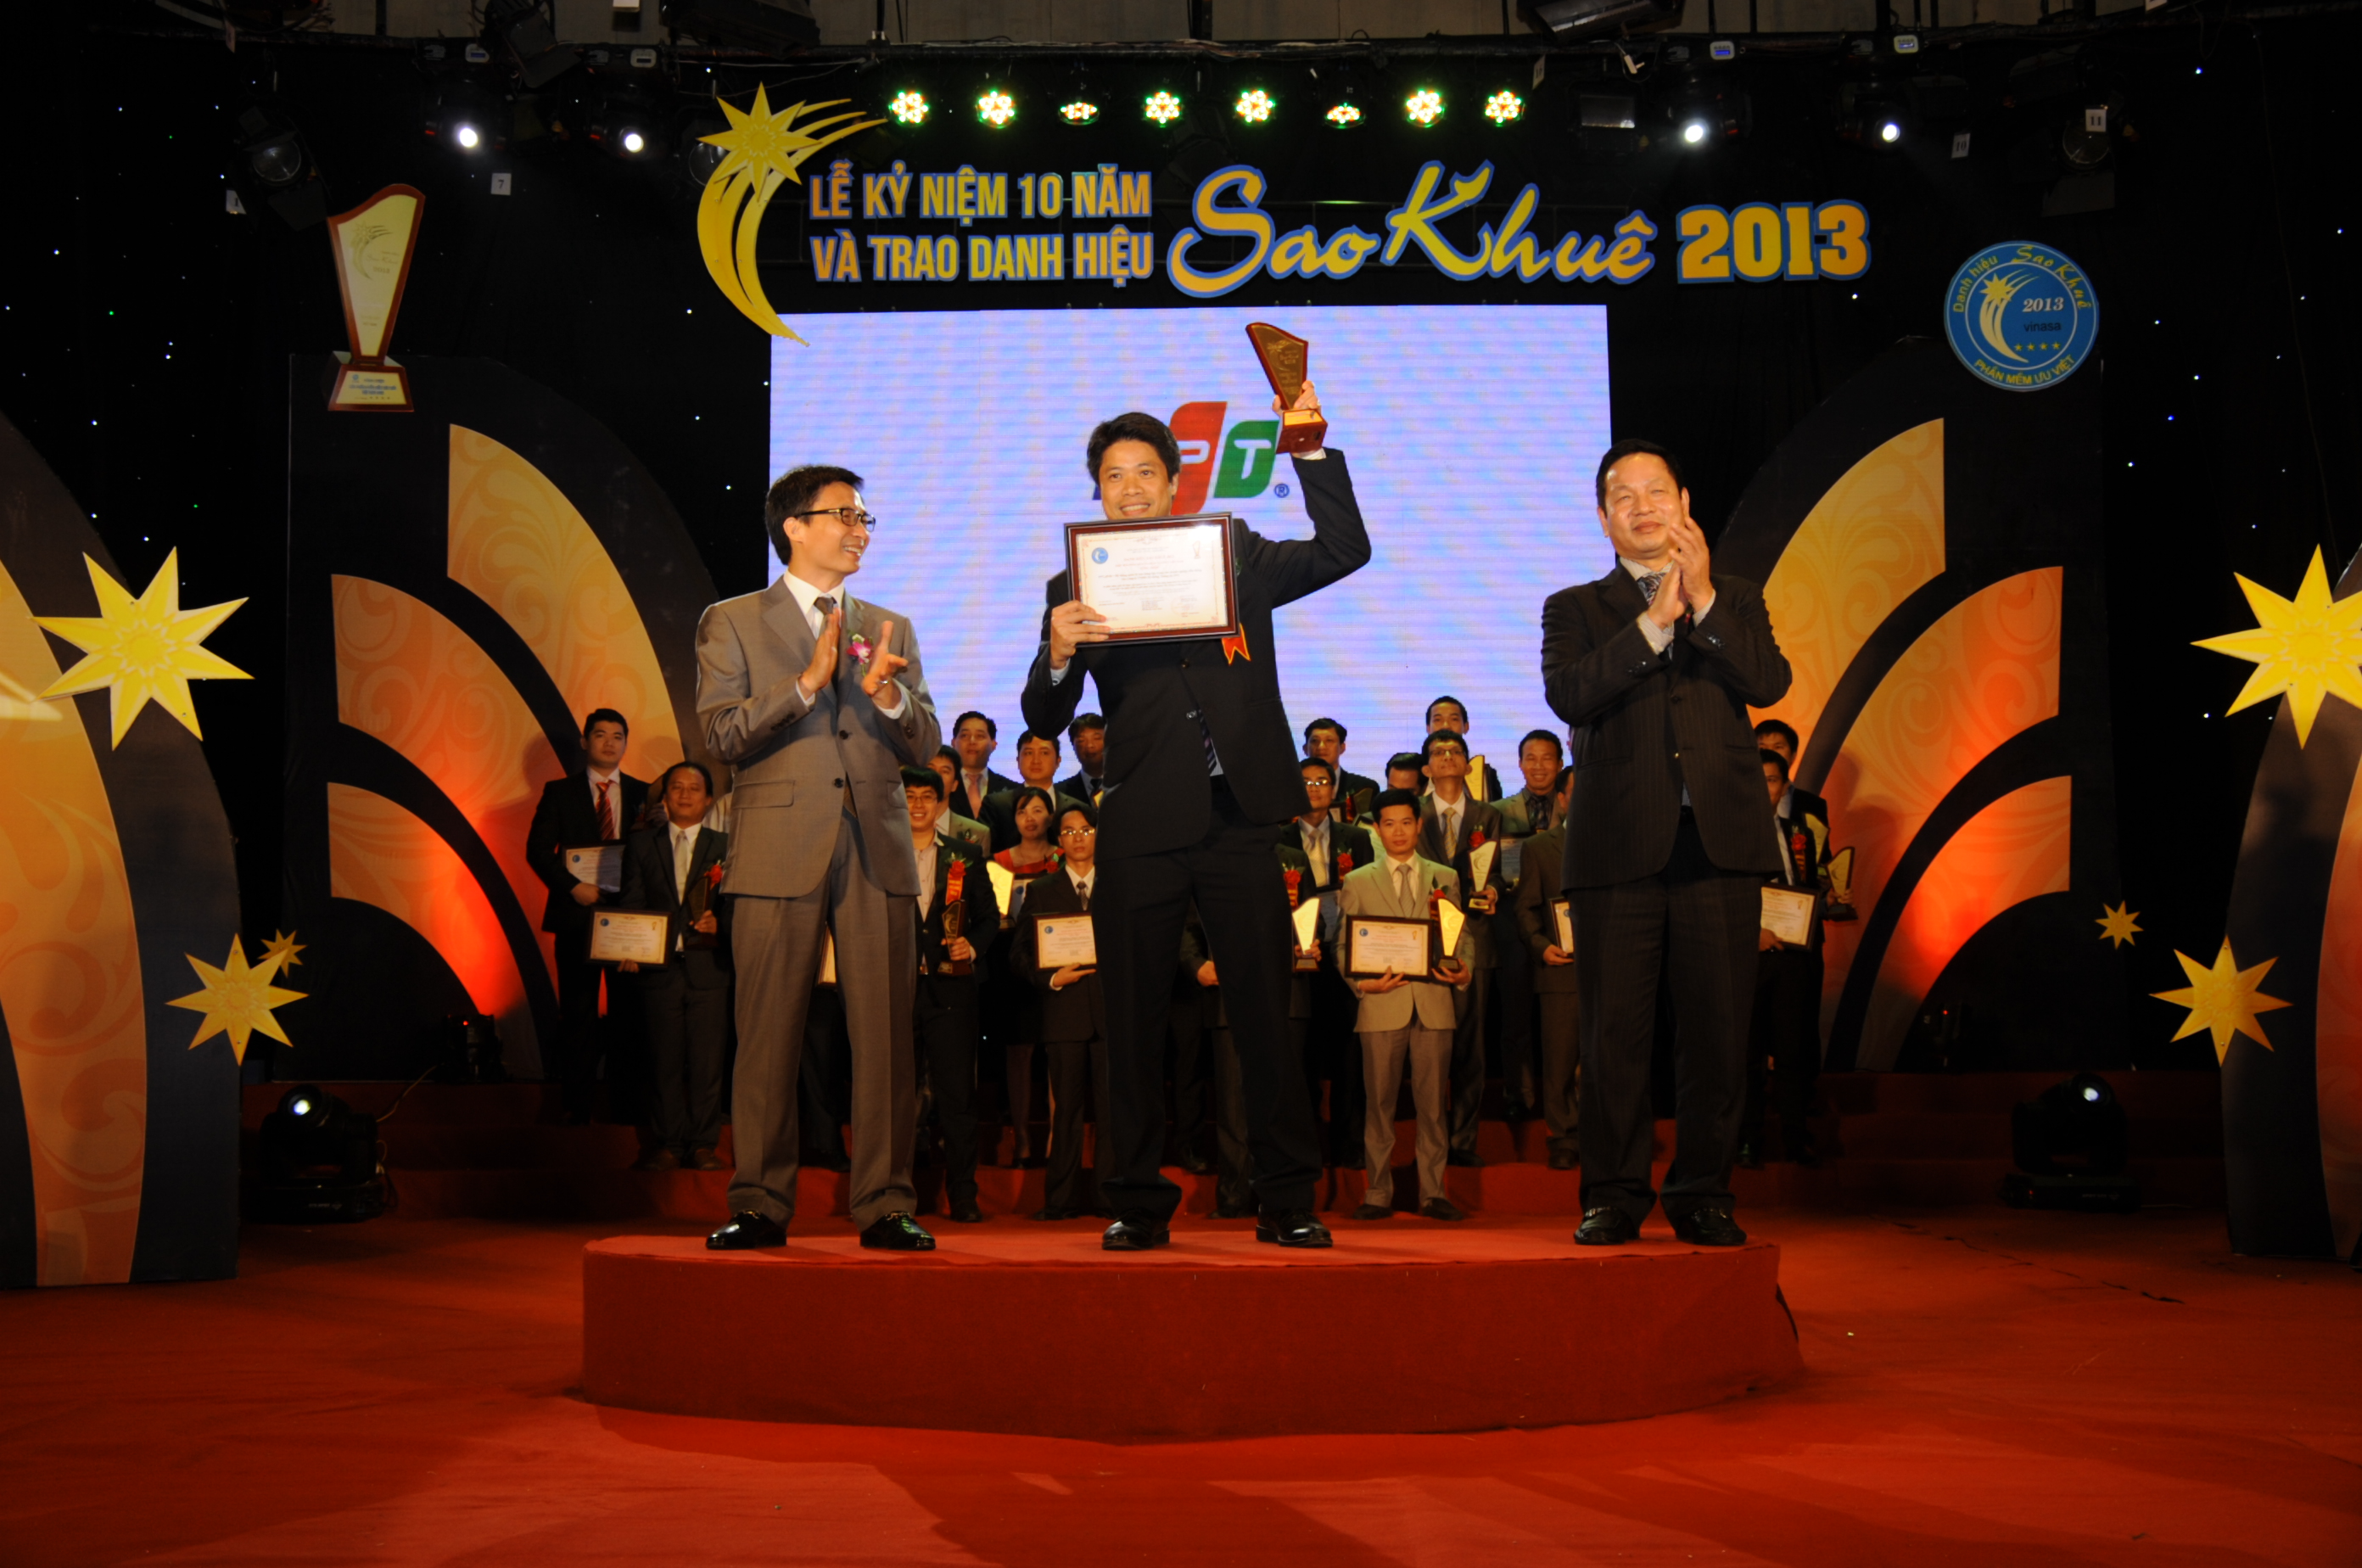 2013 Sao Khue Awards (Vietnam ICT Excellence) – Solution for managing sales and supply chains and supporting marketing activities of telecomunications enterprises (FPT.ePOS)